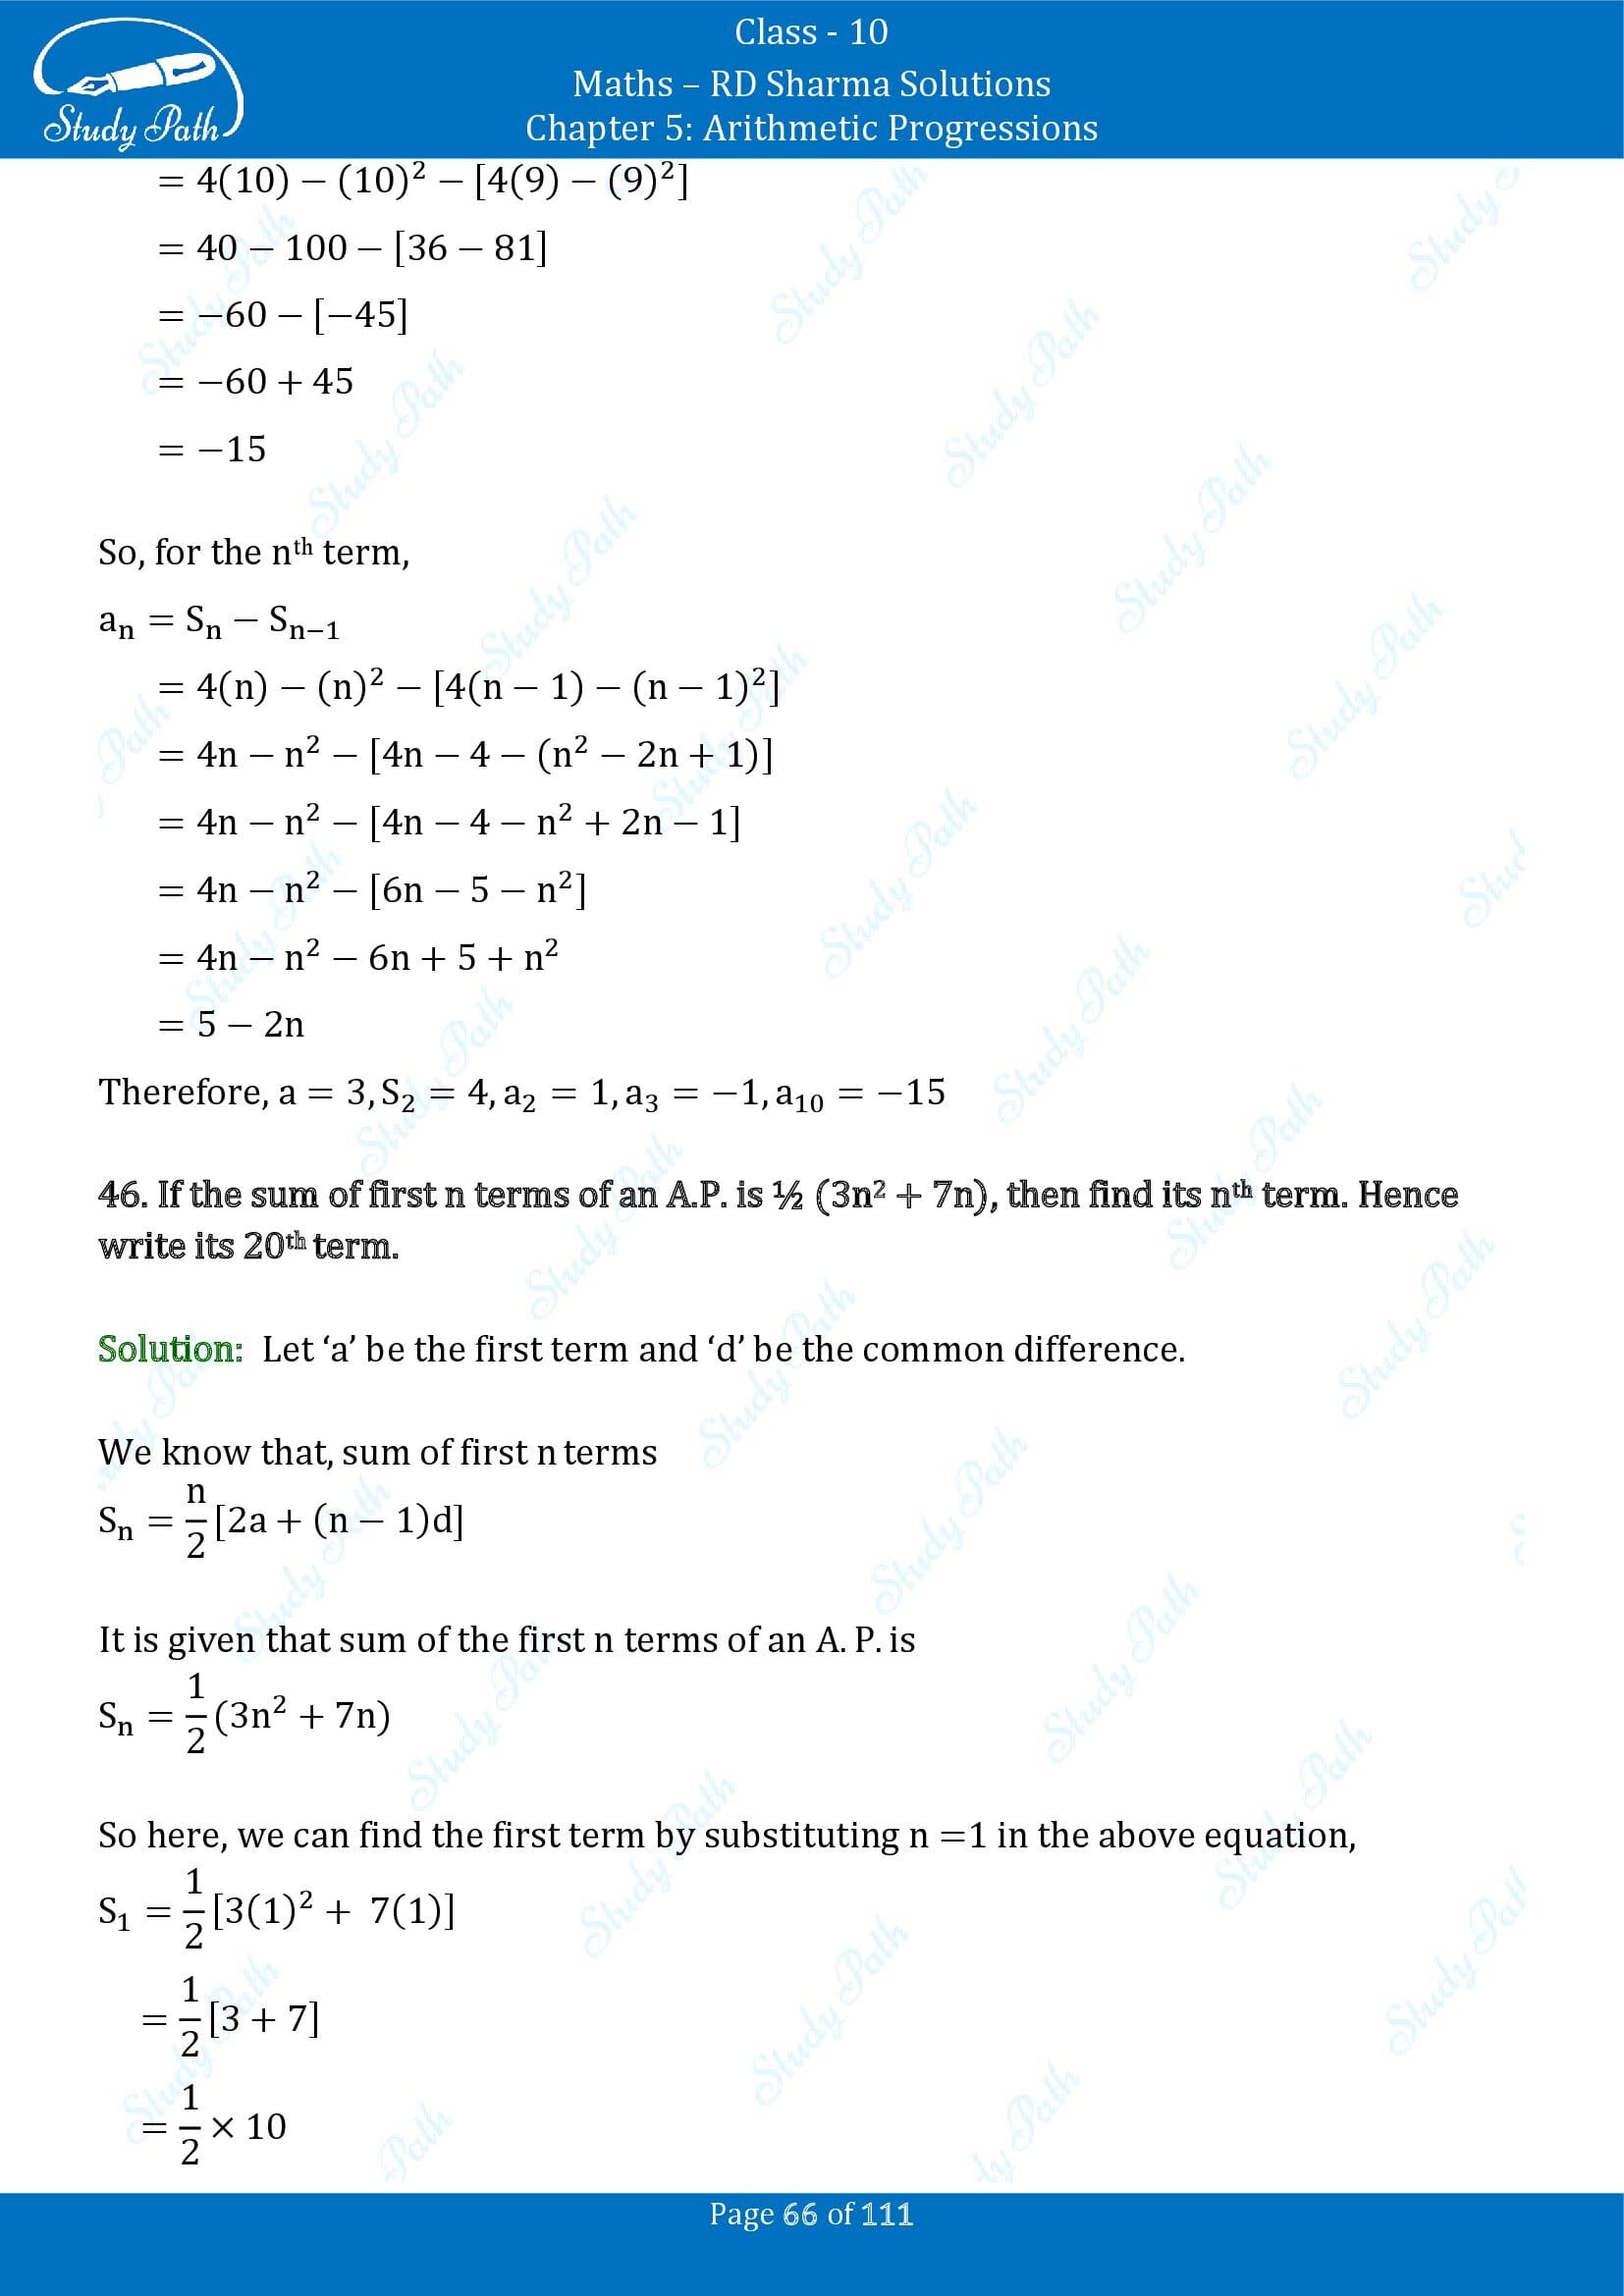 RD Sharma Solutions Class 10 Chapter 5 Arithmetic Progressions Exercise 5.6 00066